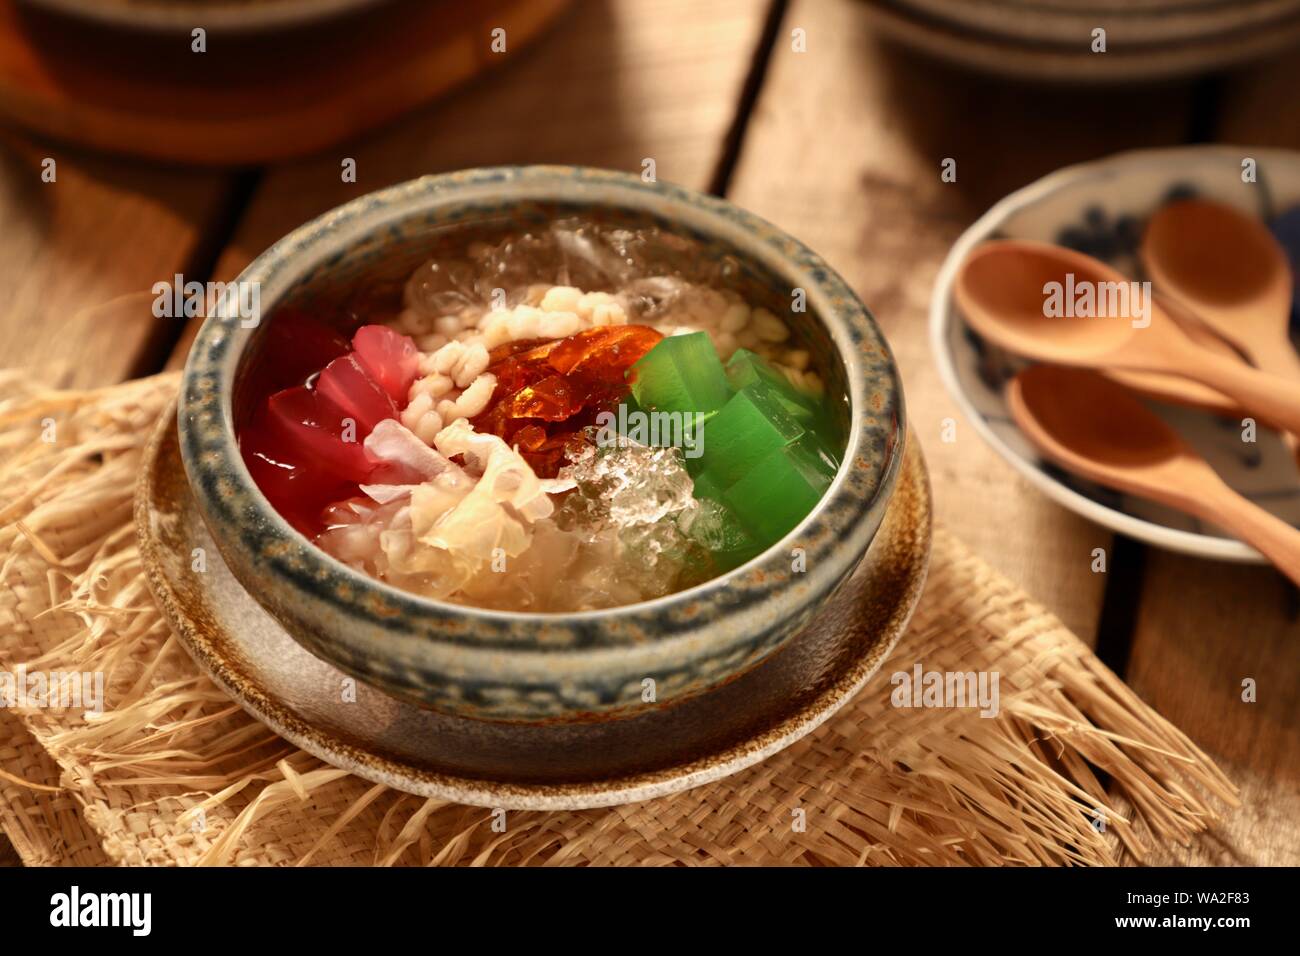 Es Sekoteng Medan. Cooling dessert cocktail of barley, palm fruit, white fungus, agar jelly, and preserved kumquat with crushed ice in sugar water. Stock Photo